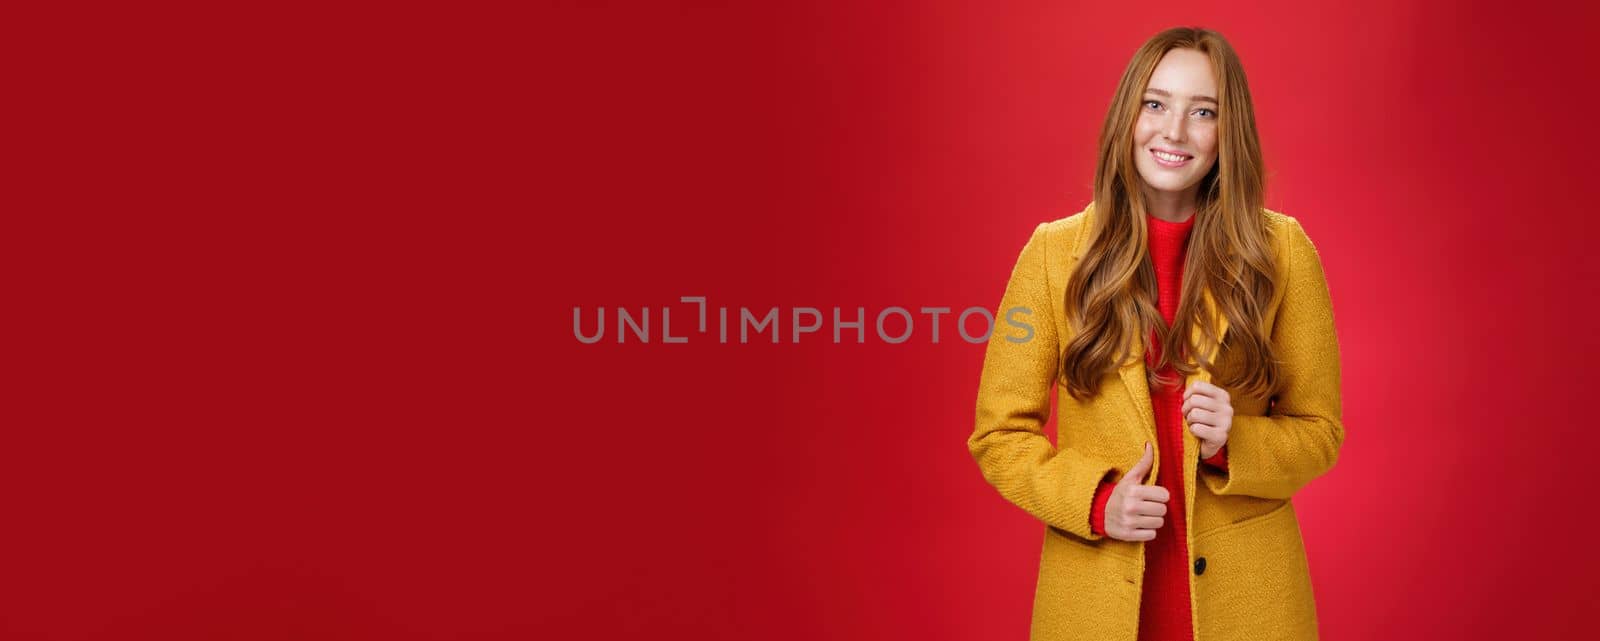 Stylish and cute good-looking redhead female in yellow coat on way to work, grabbing coffee making order with cute friendly smile touching button and posing over red background.